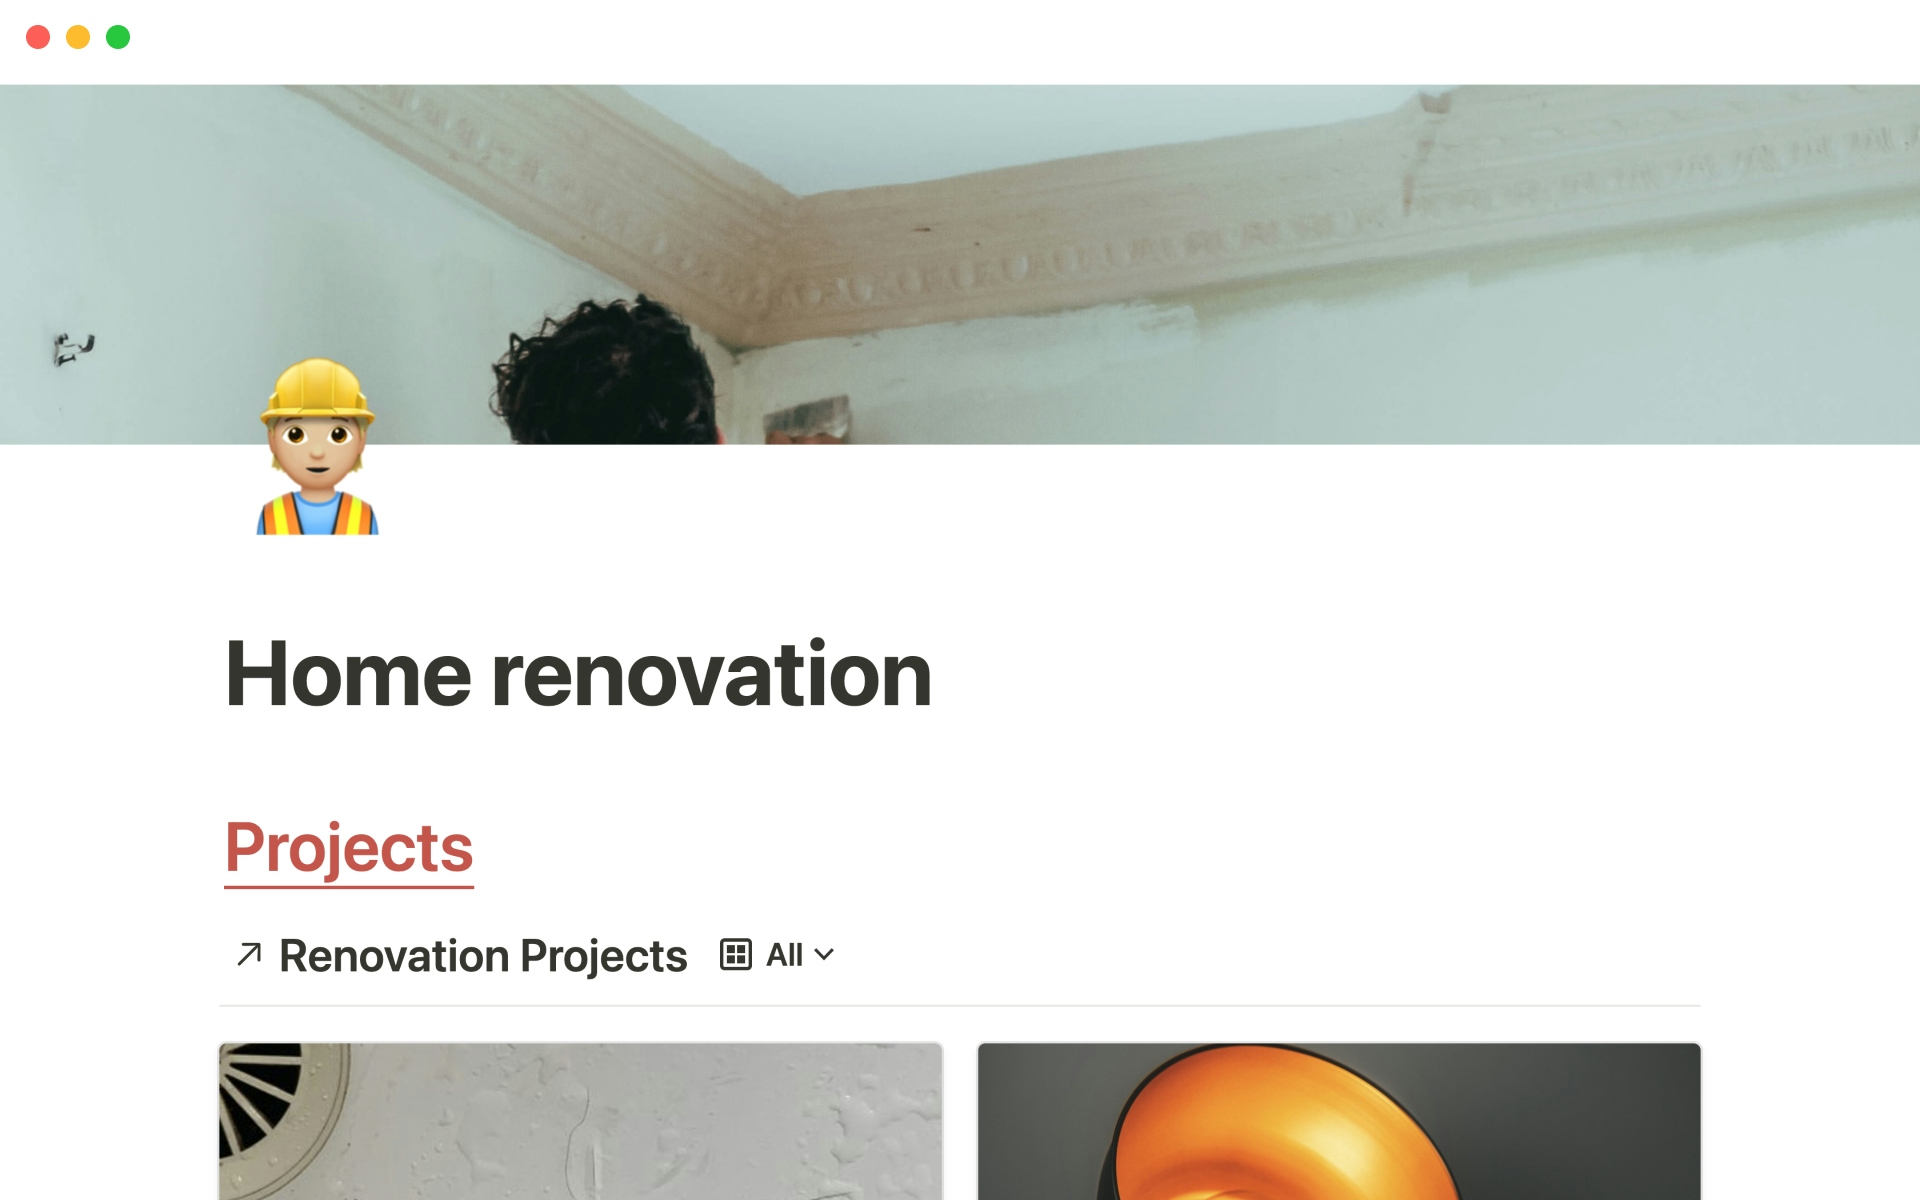 The desktop image for the Home renovation template